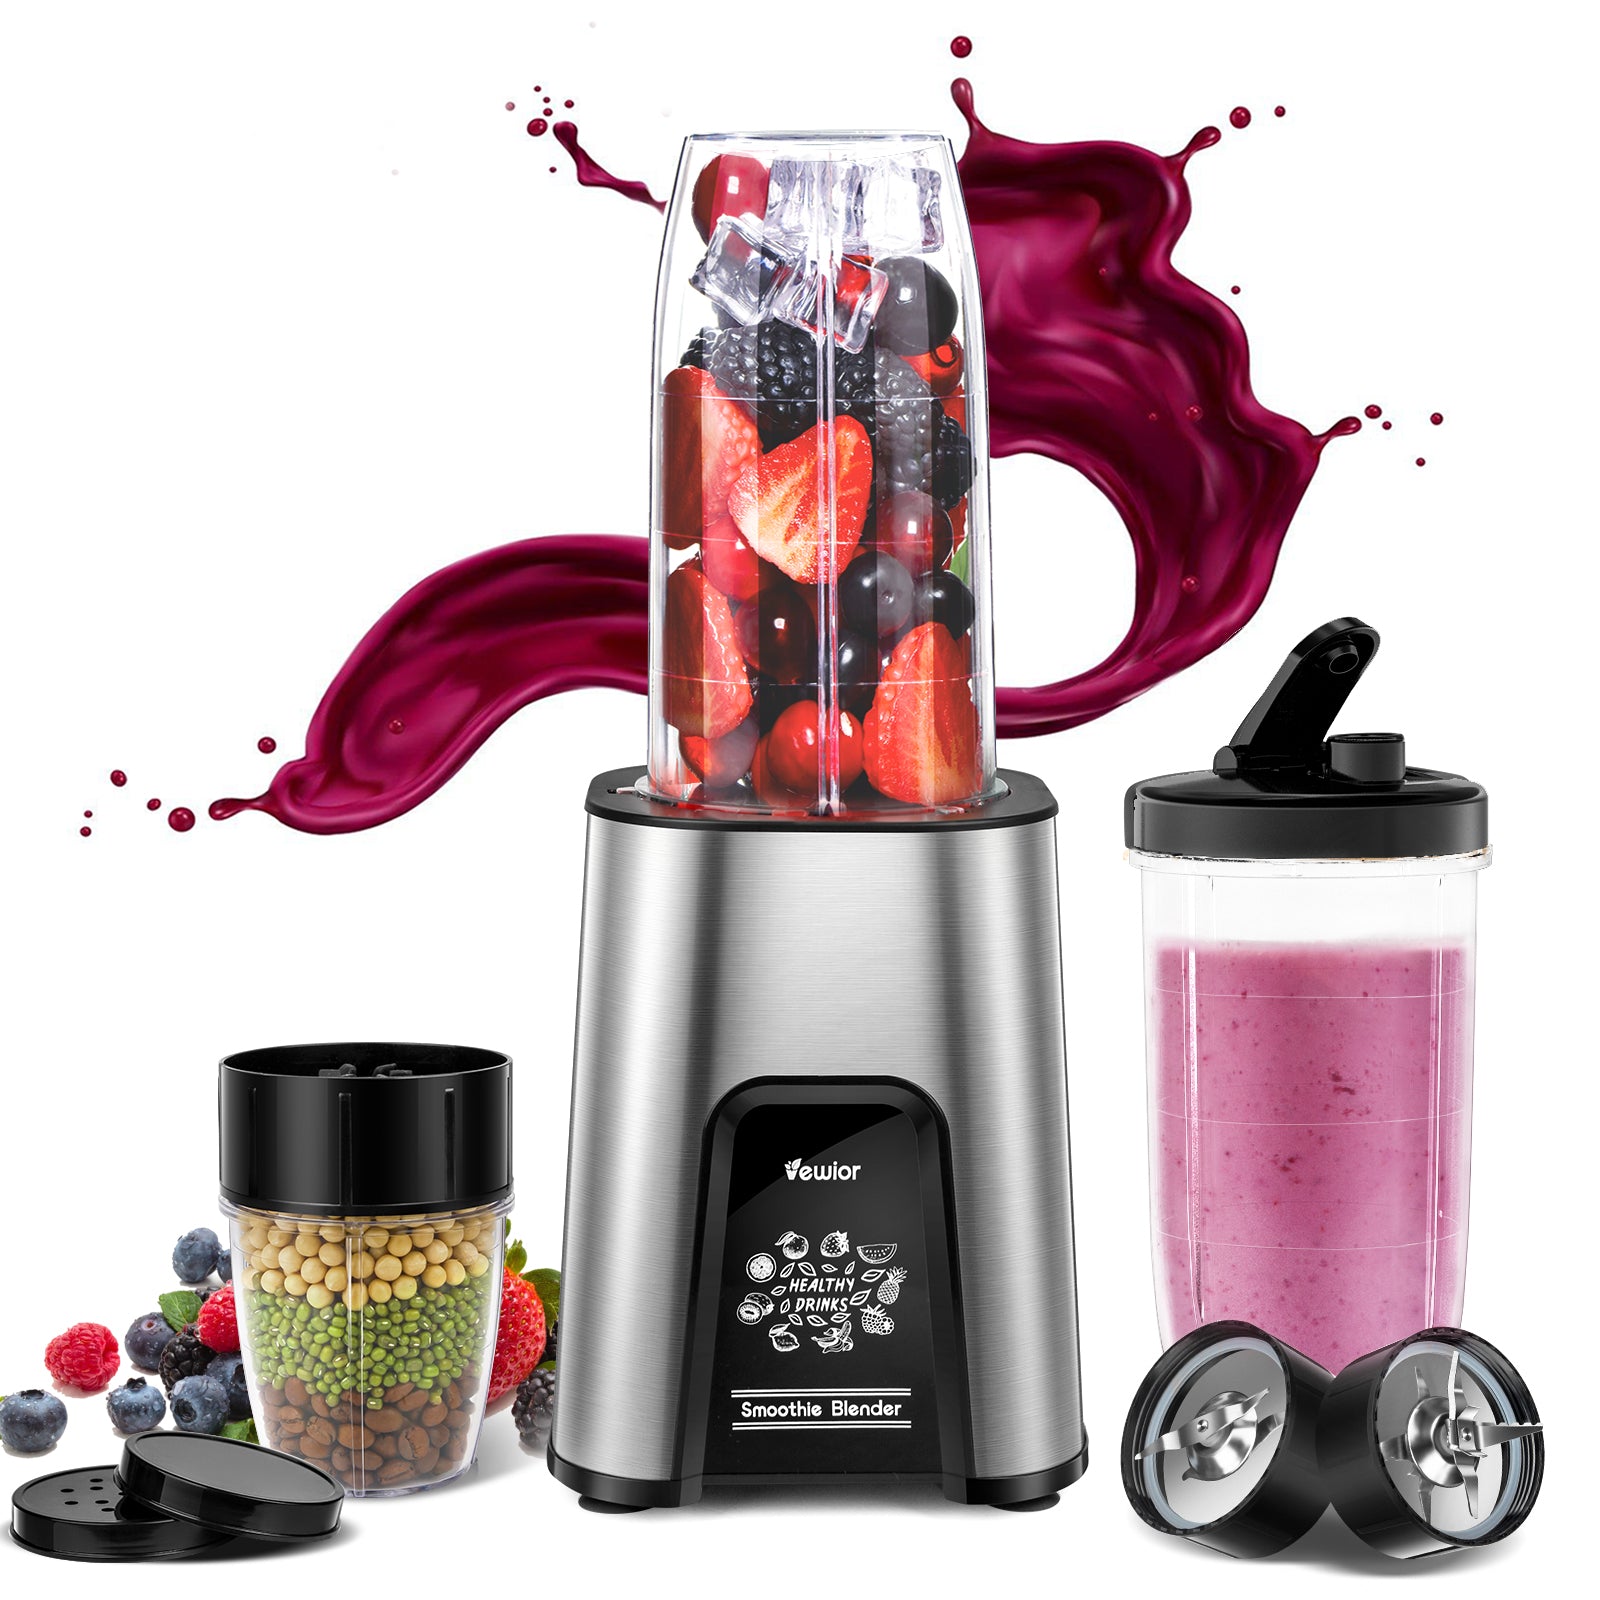 KOIOS 850W Personal Blender for Shakes and Smoothies - Compact Smoothie  Maker